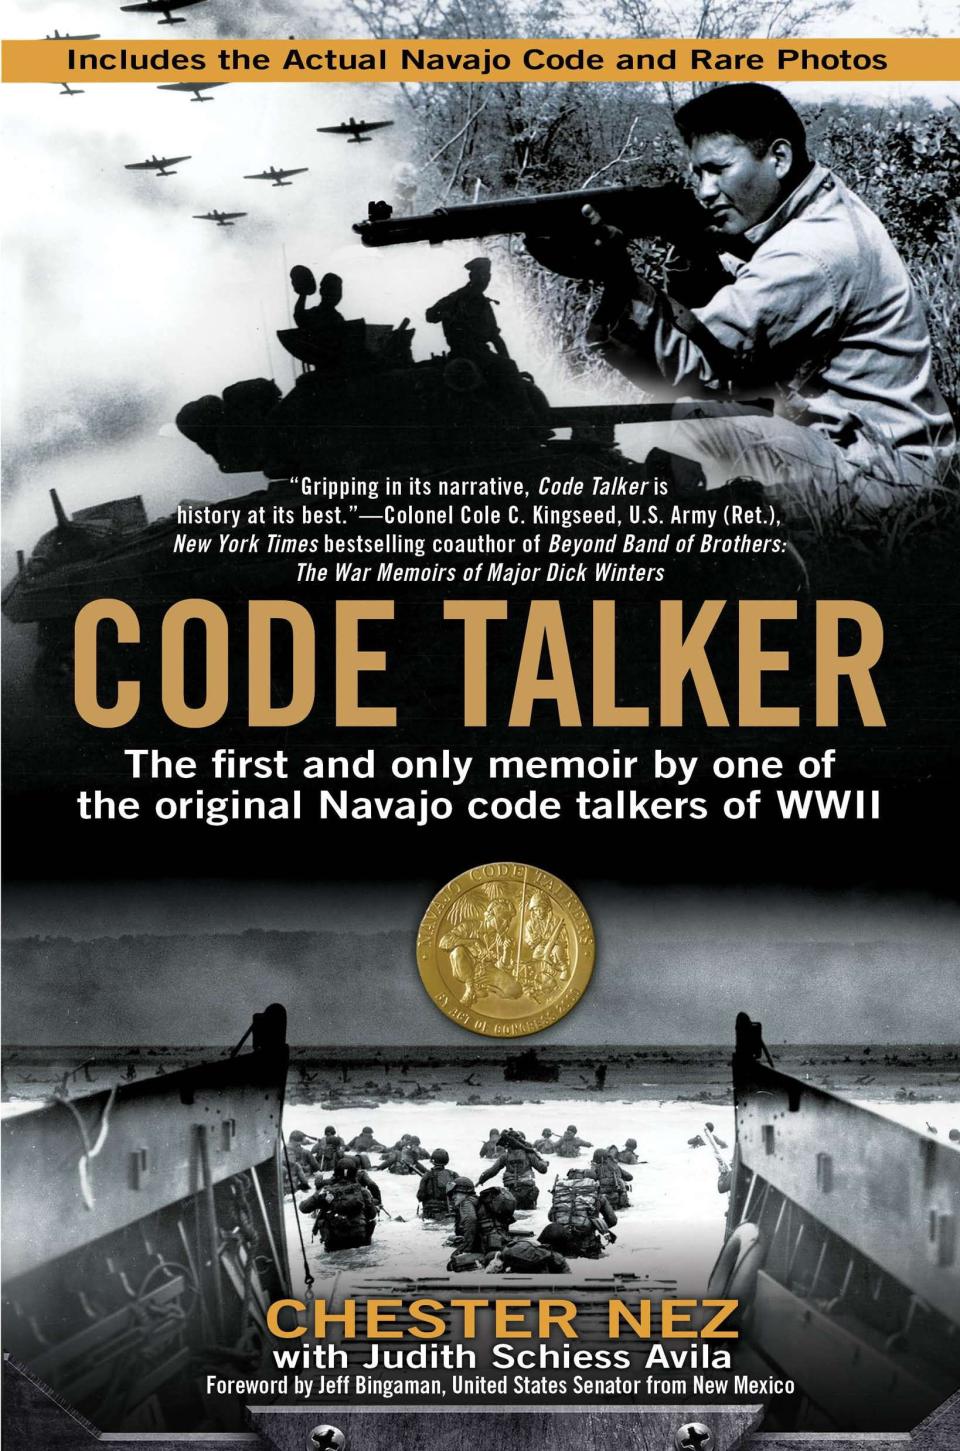 "Code Talker: The First and Only Memoir By One of the Original Navajo Code Talkers of WWII," by Chester Nez with Judith Schiess Avila